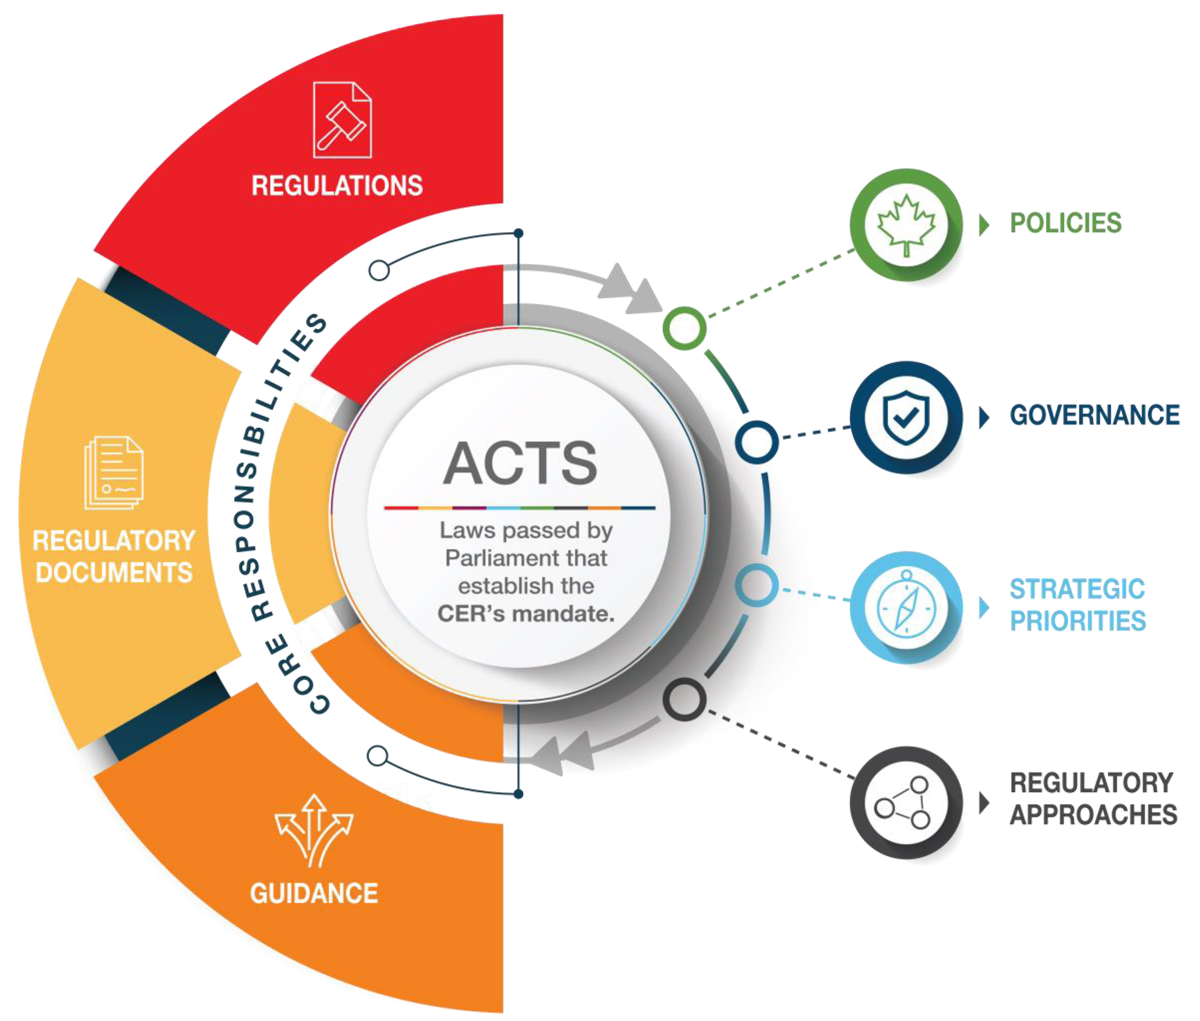 The new CER Regulatory Framework graphic is a circle shape with dynamic arrows around a center button that reads ‘ACTS’. On the right-side are blocks in orange, yellow and red for our regulatory tools: Guidance, Regulatory Documents and Regulations with a half-circle block for ‘Core Responsibilities’ running through. On the left-side is a series of connected color dots with symbols: a green maple leaf, a navy-blue shield, a sky-blue compass, and a black triangle.